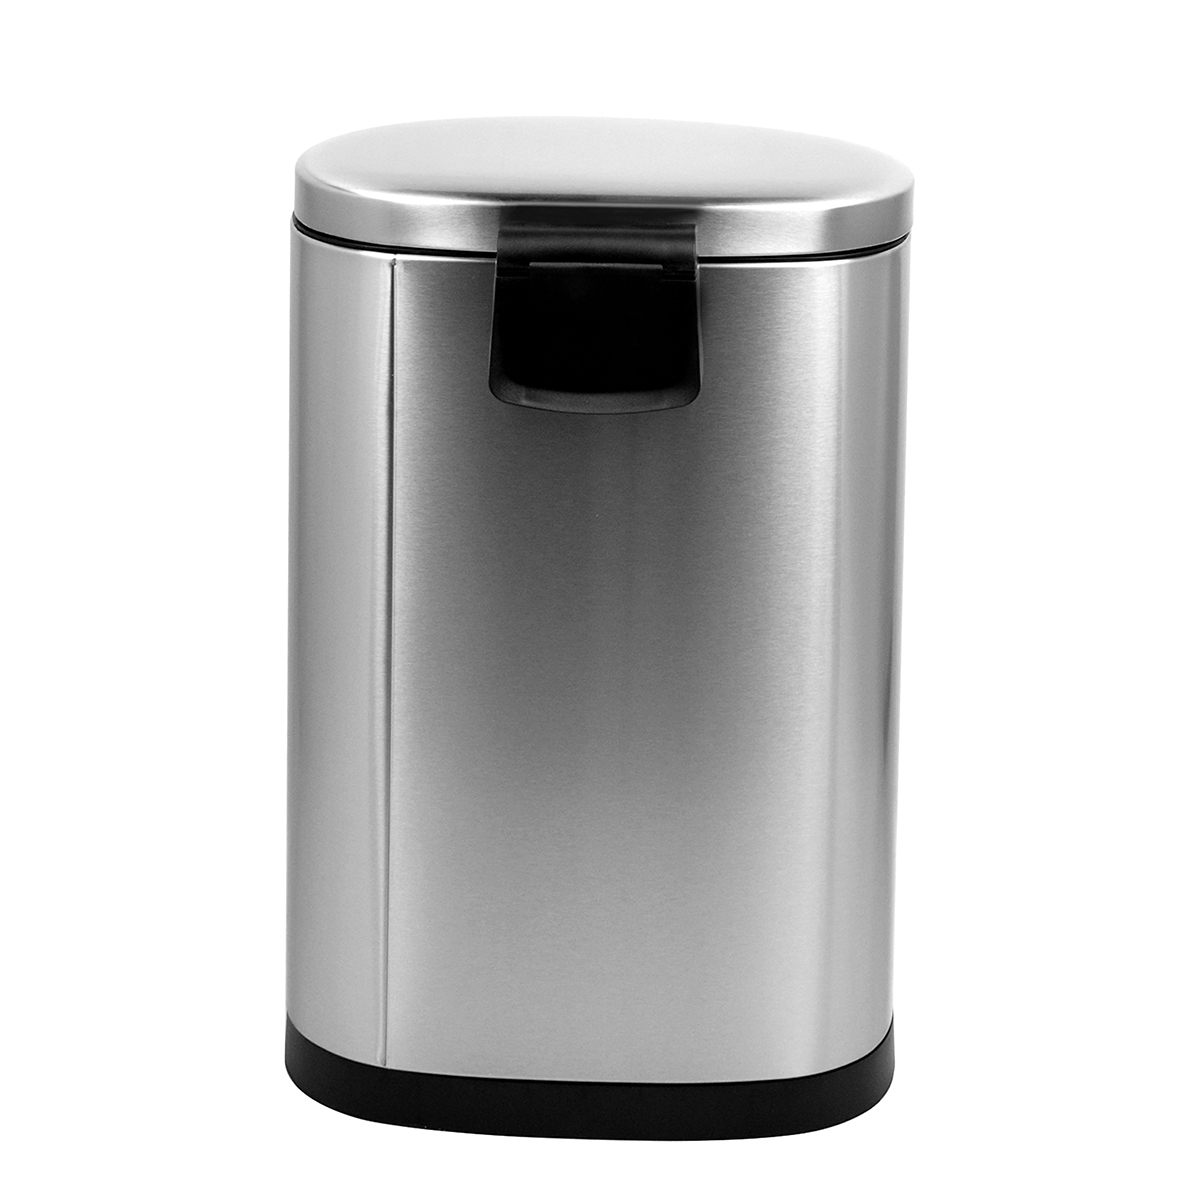 https://www.containerstore.com/catalogimages/408688/10083239-TCS-10.5gal-semi-round-step.jpg